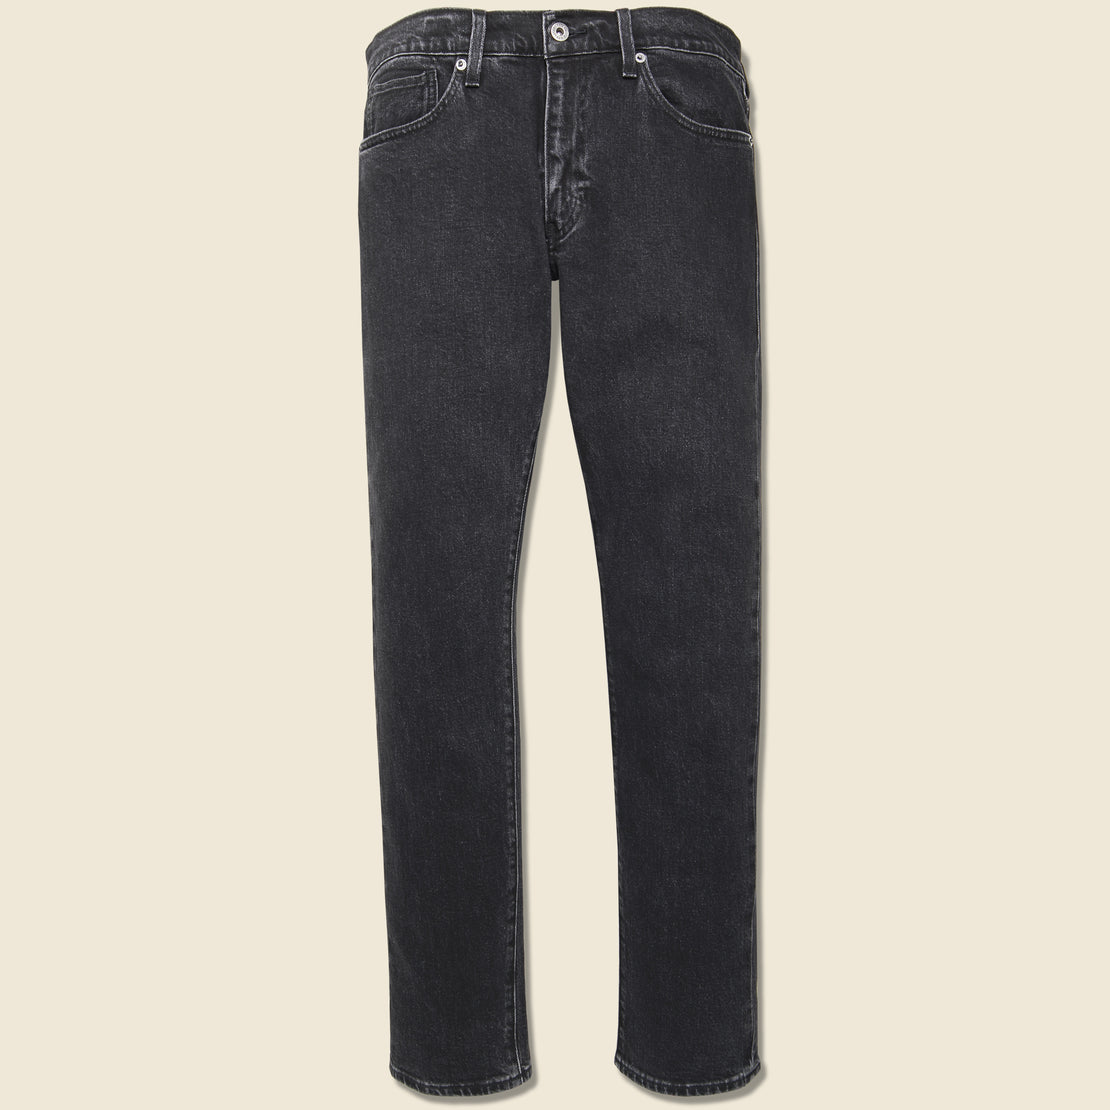 Levis Made & Crafted 511 Slim Fit Jean - Blackbill